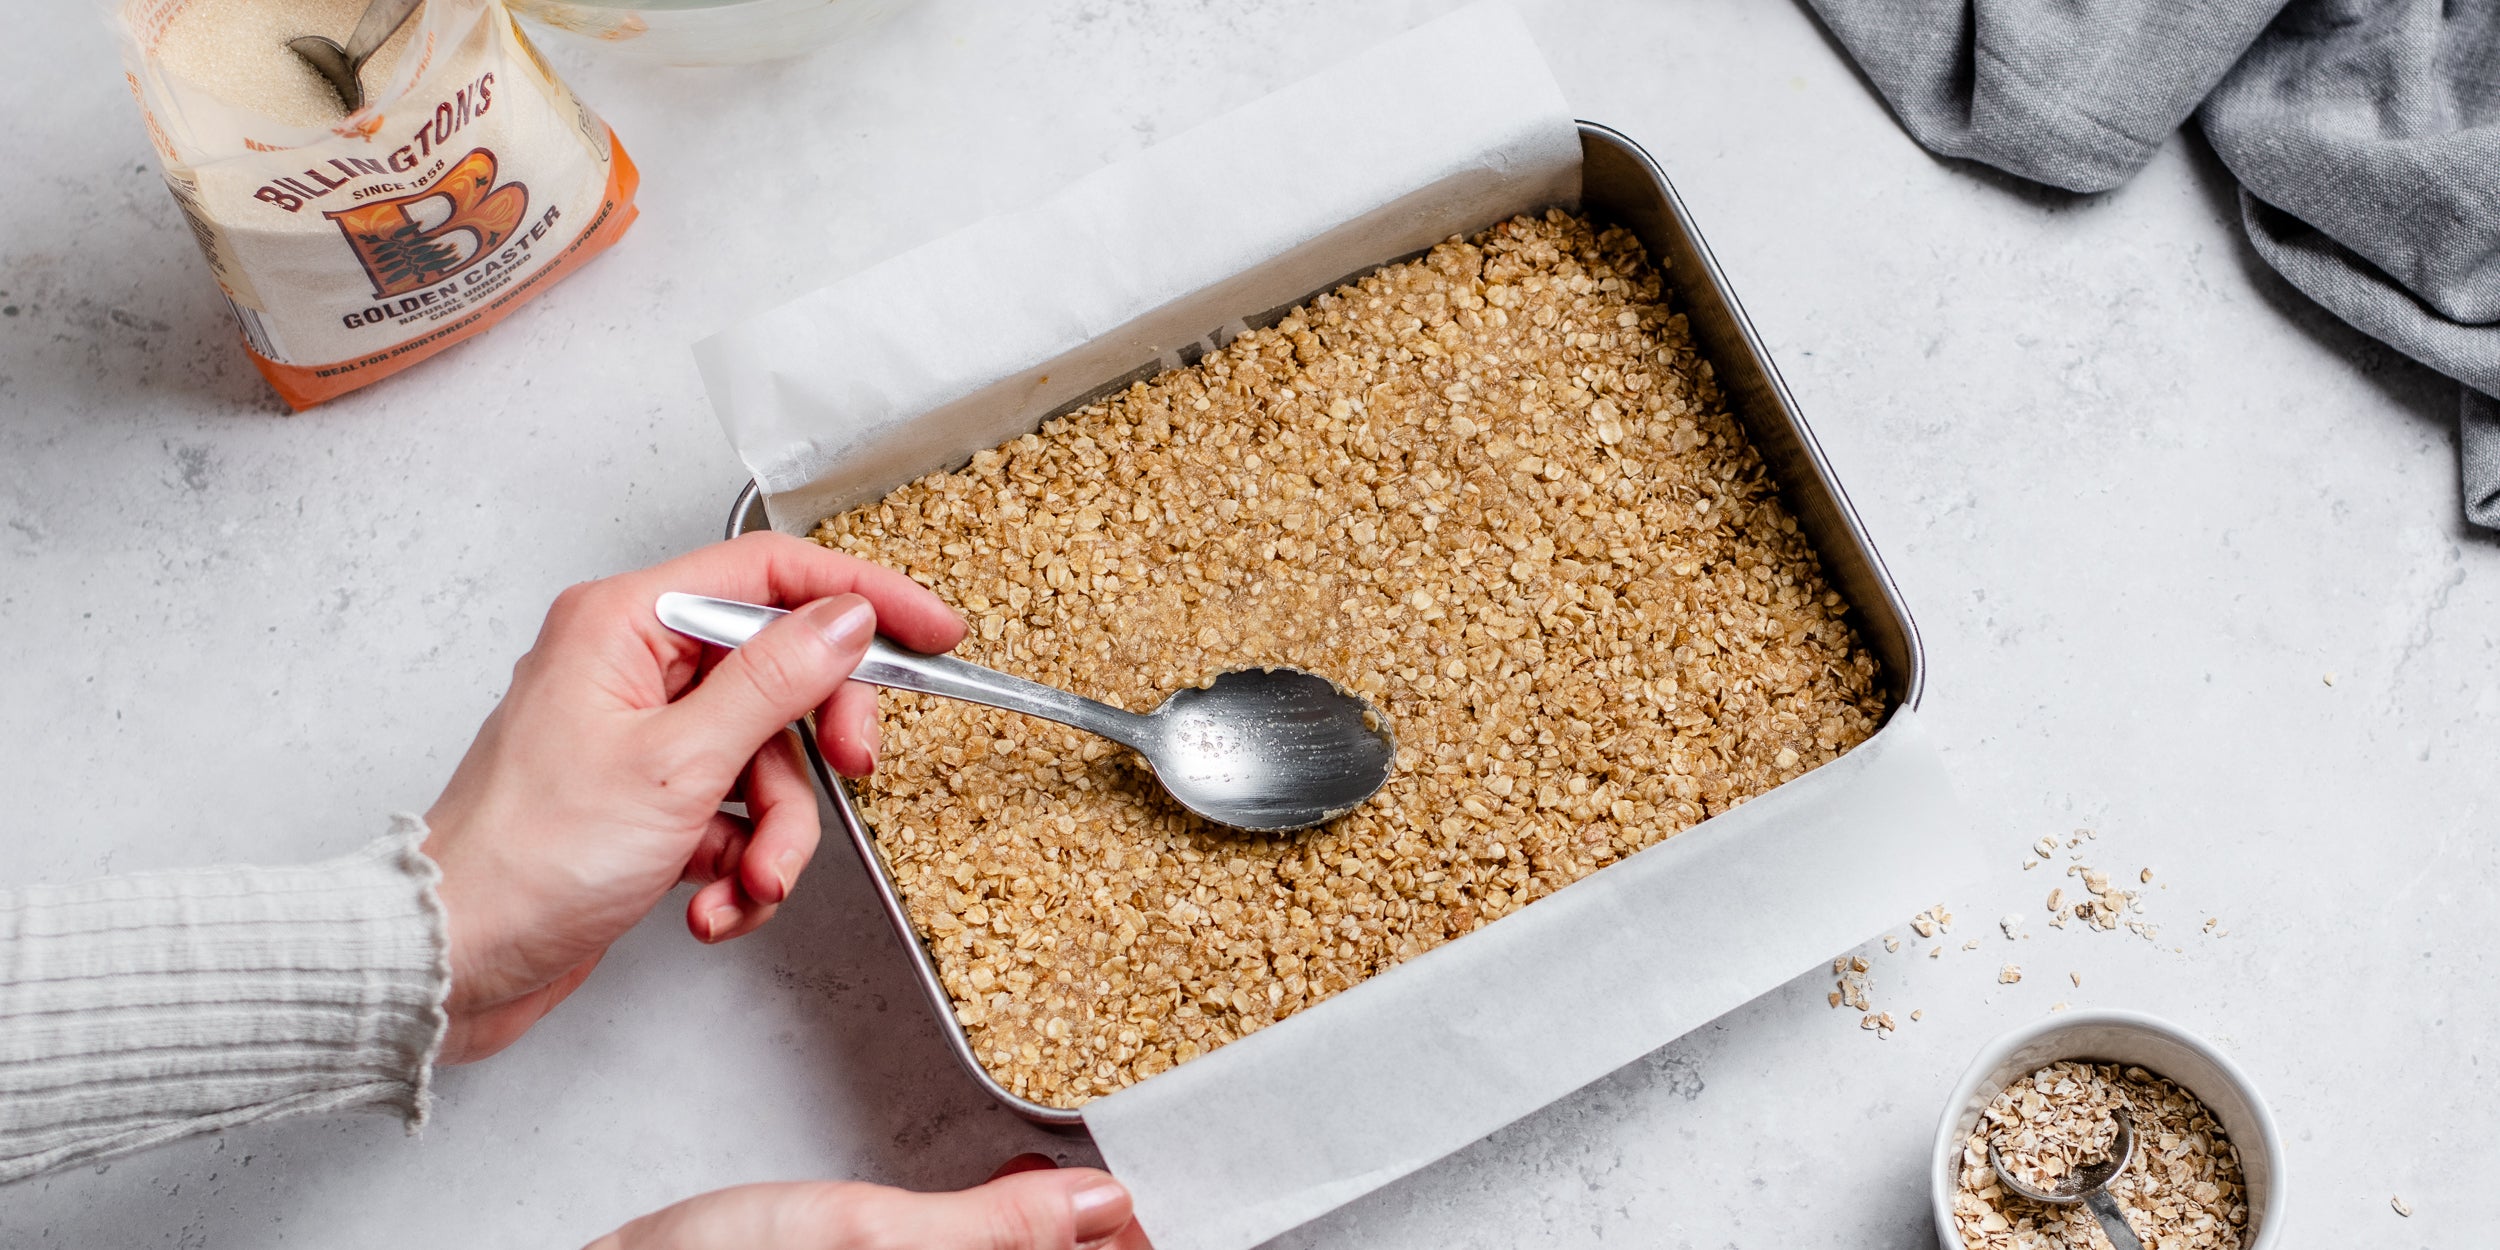 Easy Flapjack being packed into a lined baking tray with a hand holding a spoon. Next to a bag of Billington's Golden Caster Sugar